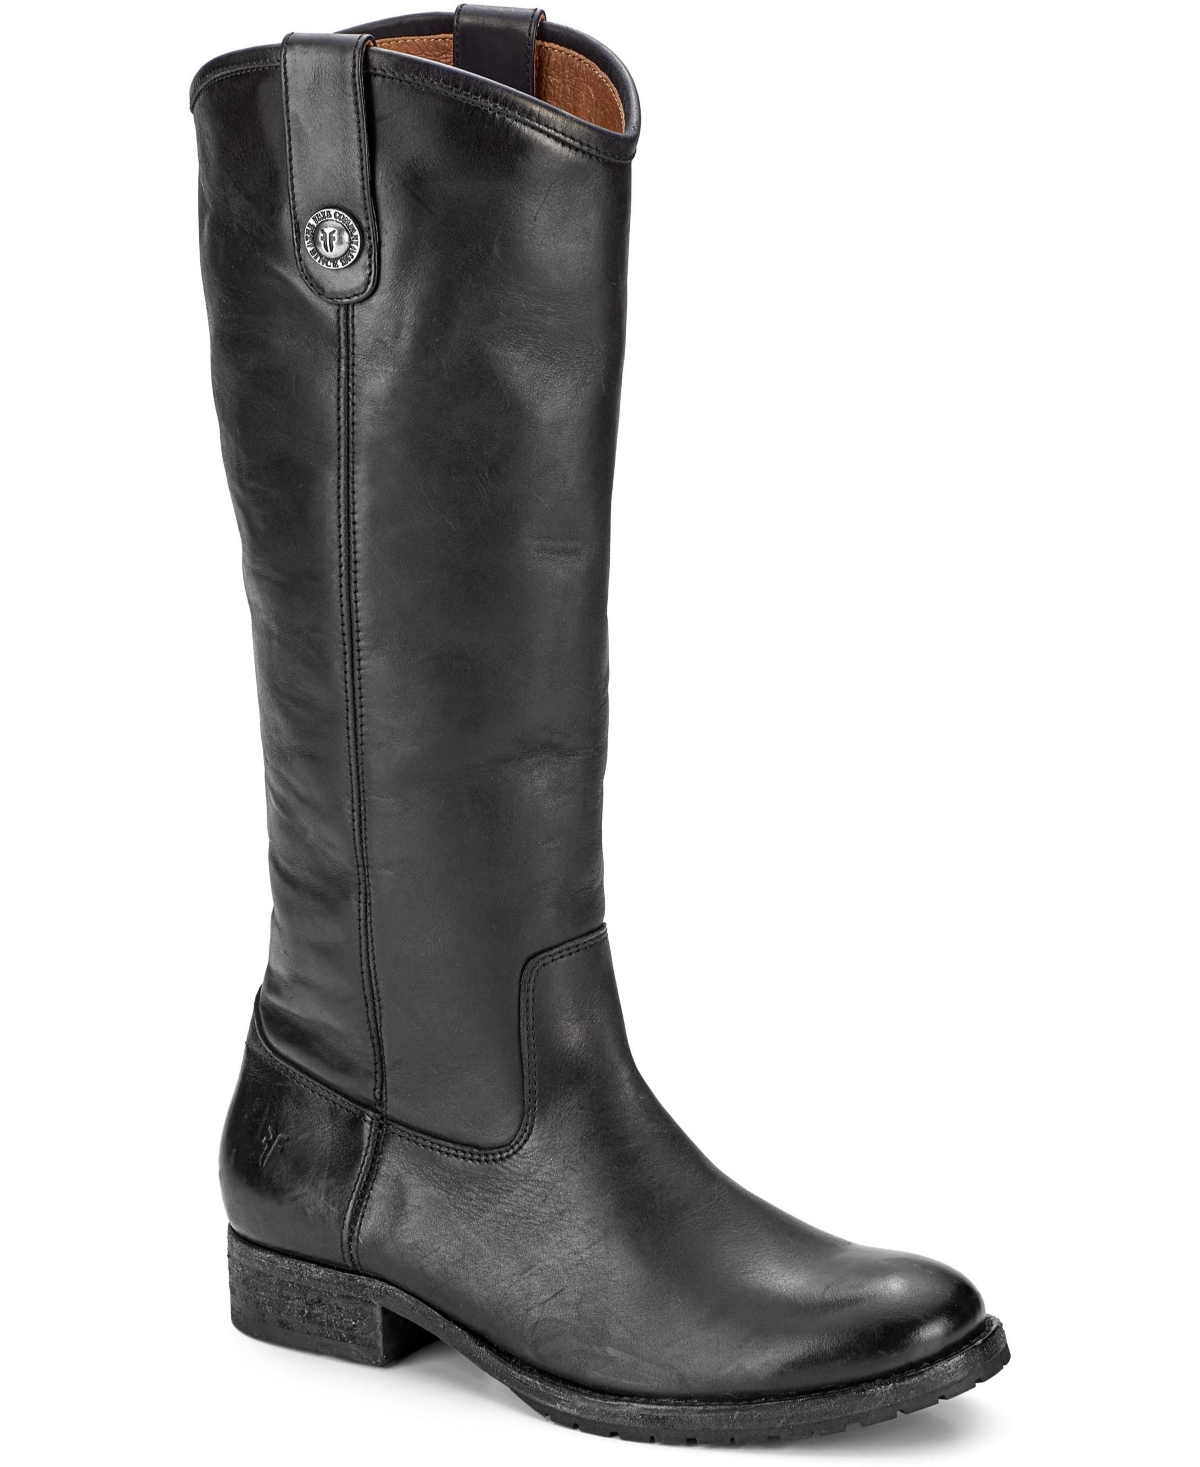 Women's Melissa Tall Boots - Black Leather